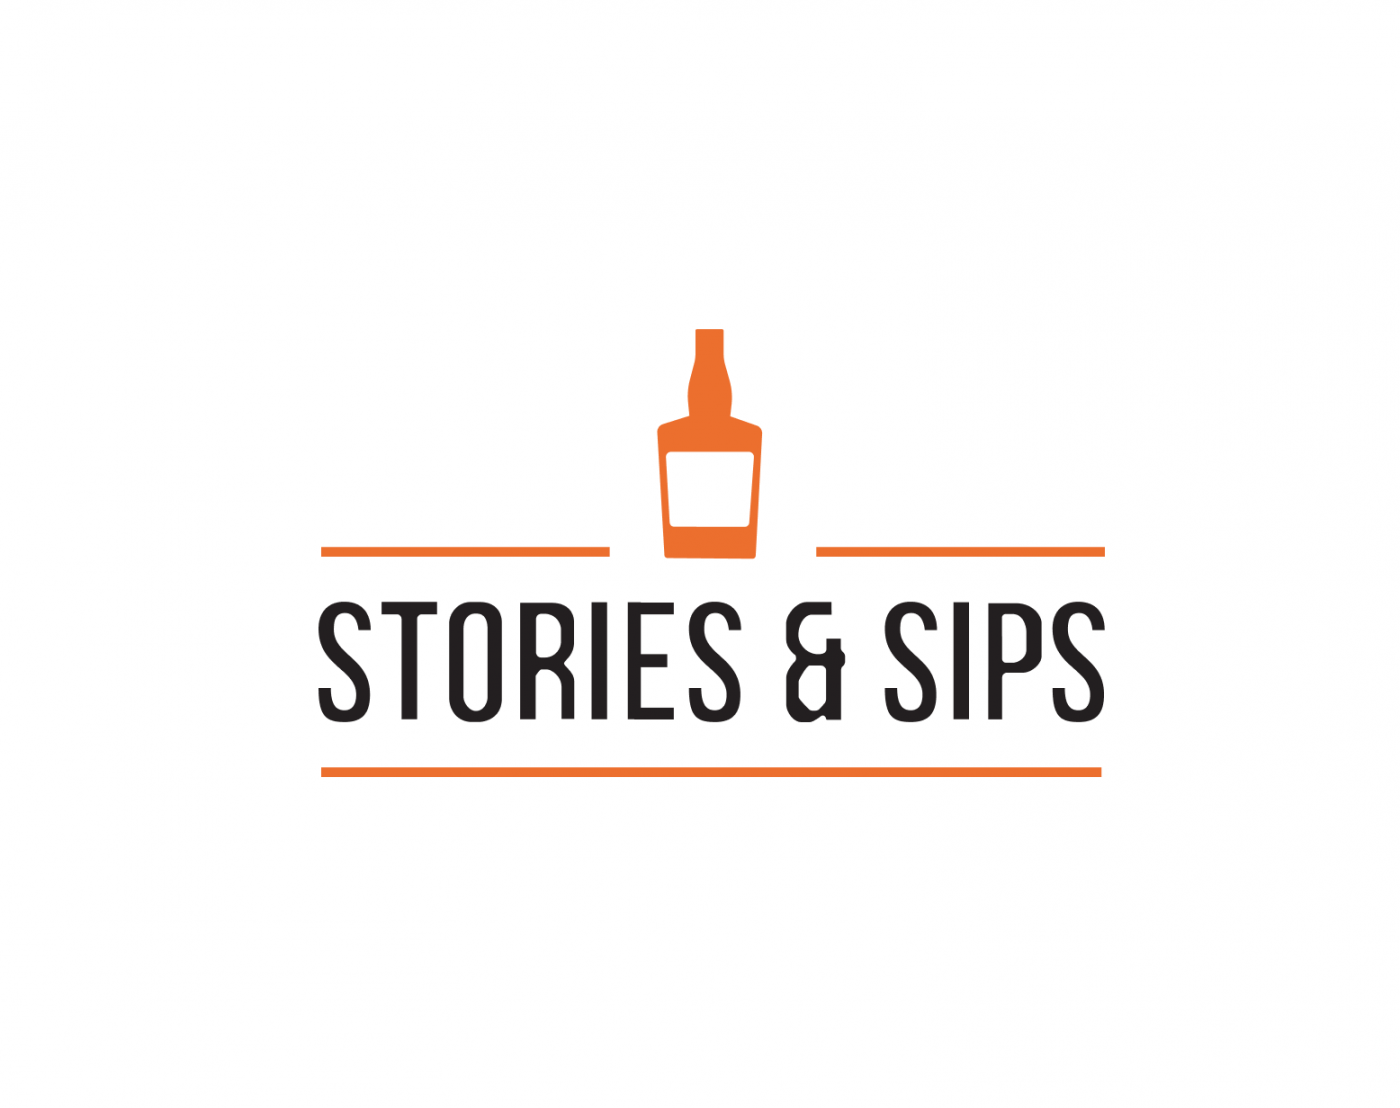 nfn-casestudy-stories-and-sips-26